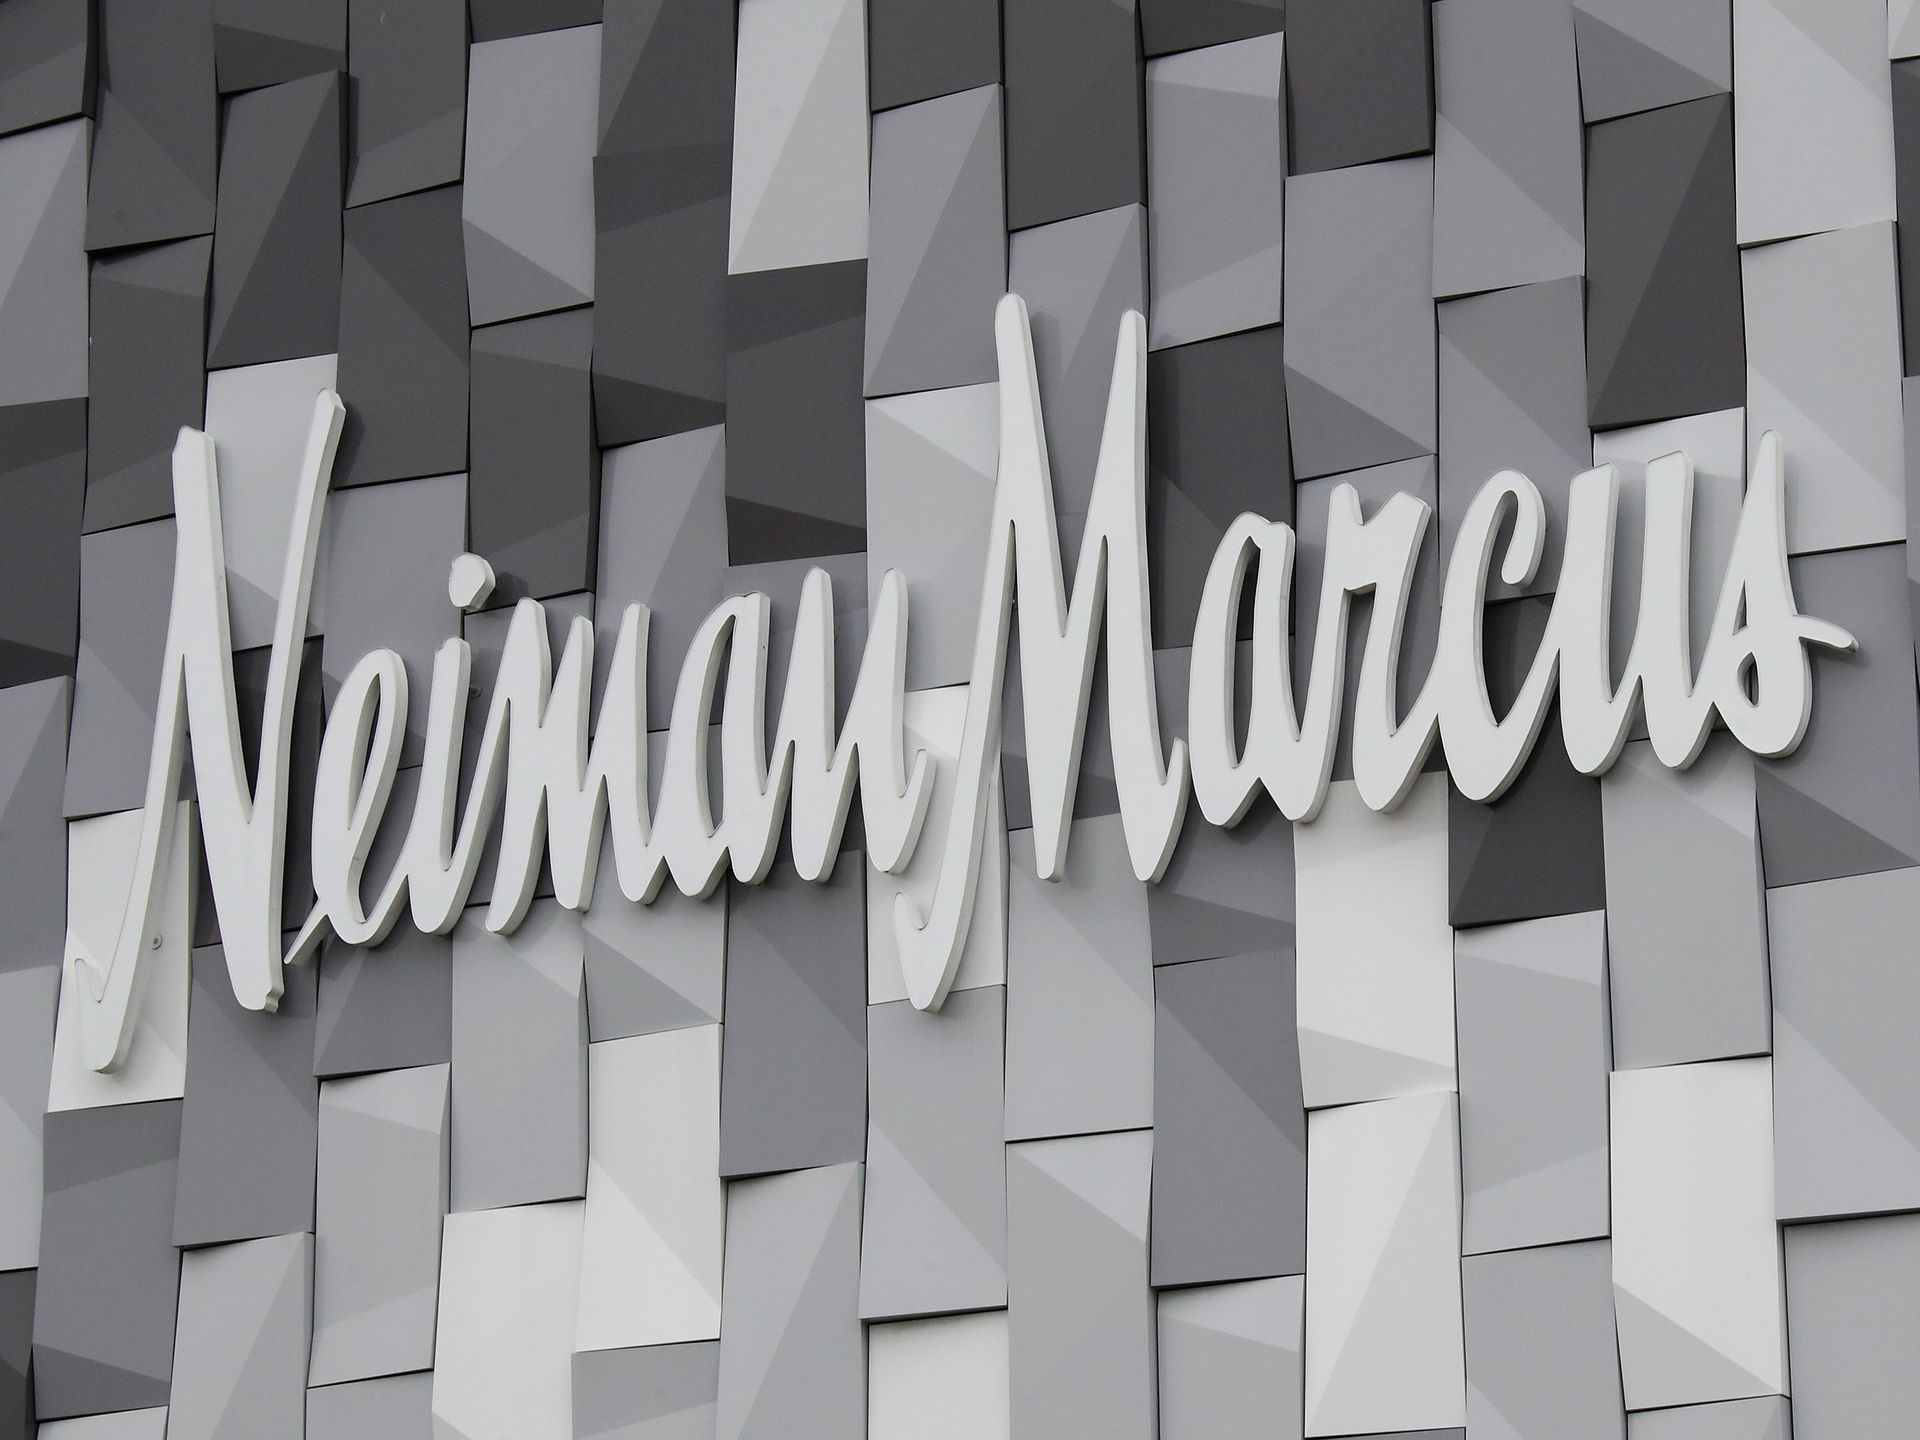 Neiman Marcus holds tight to top standing in luxury retailing